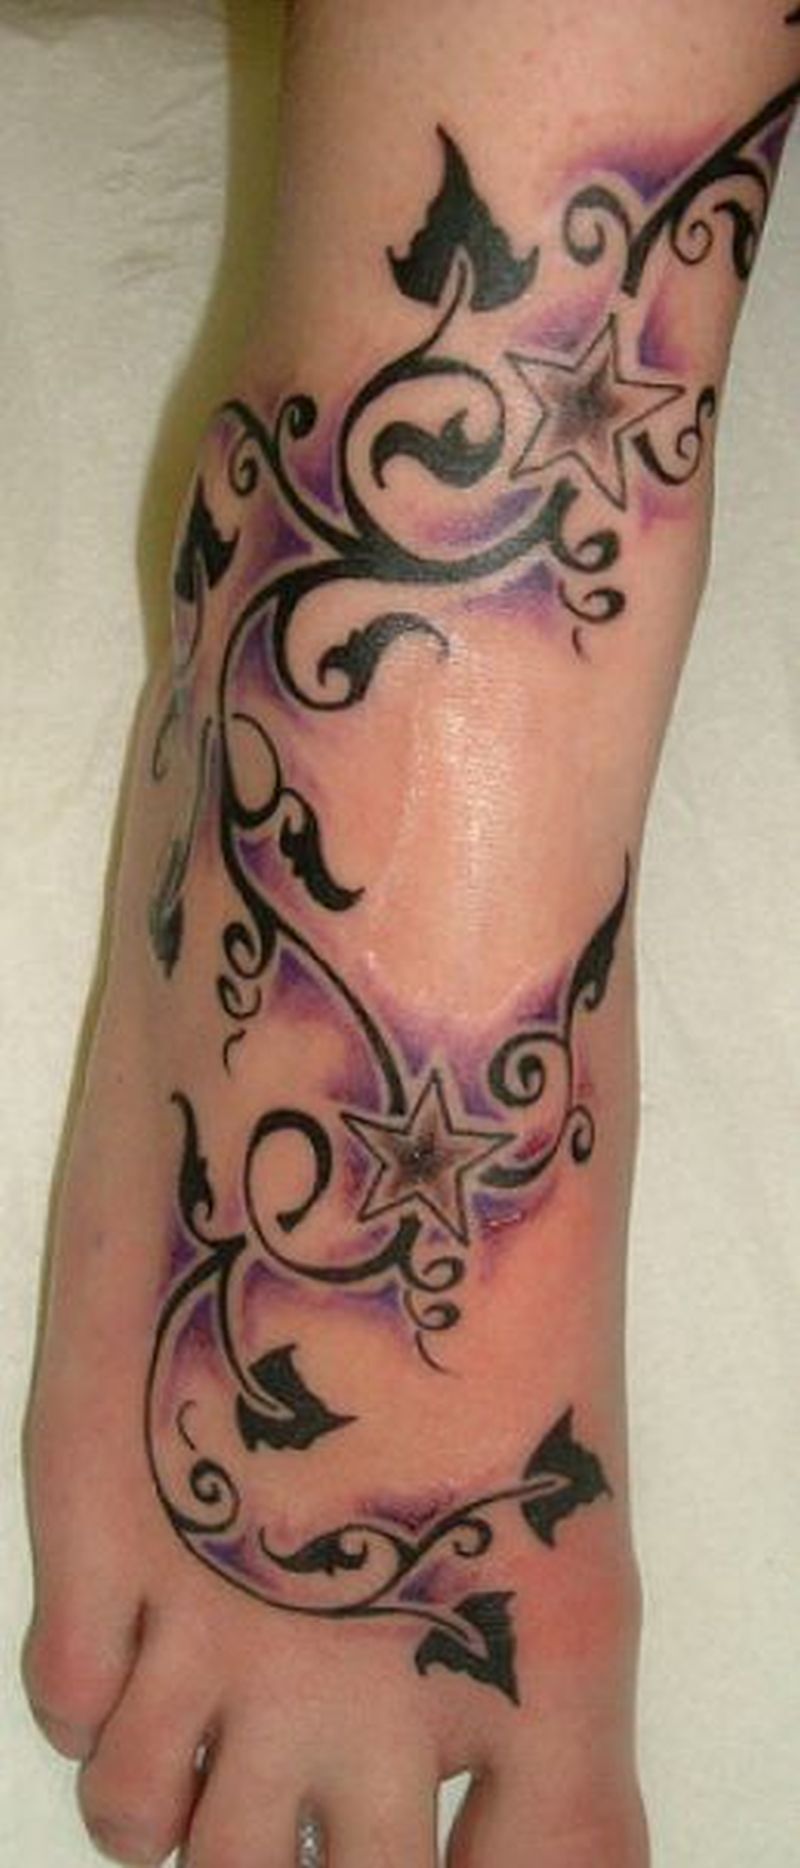 Awesome Ivy Stars Vine Tattoo On Foot